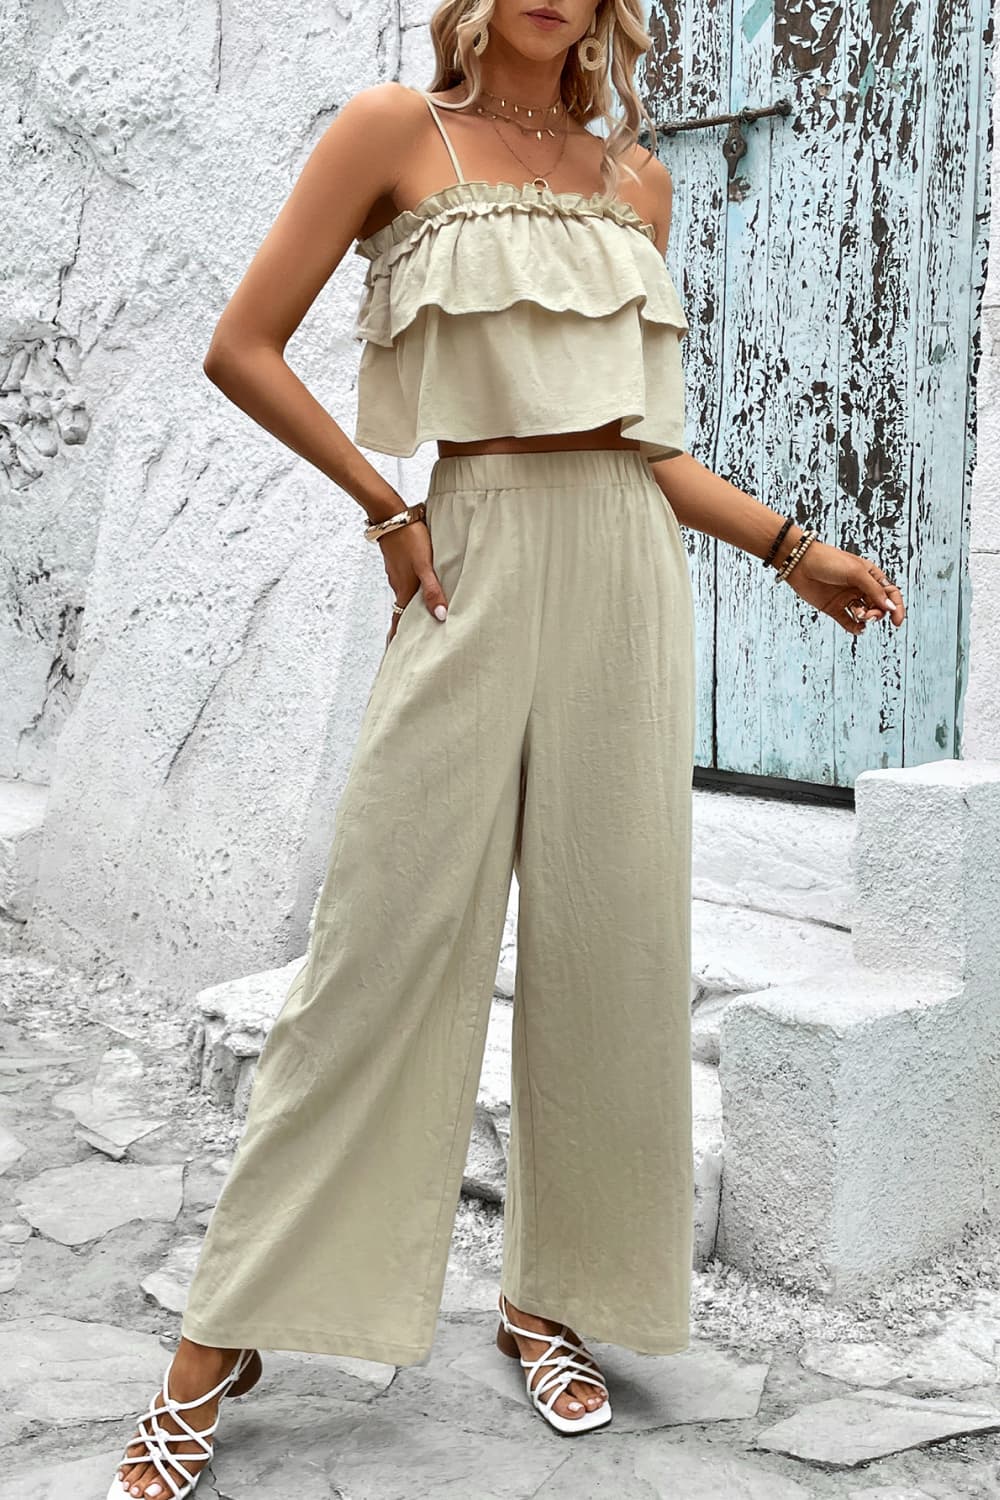 Jerry's Apparel Matching Sets Cream / S Frill Trim Cami and Wide Leg Pants Set